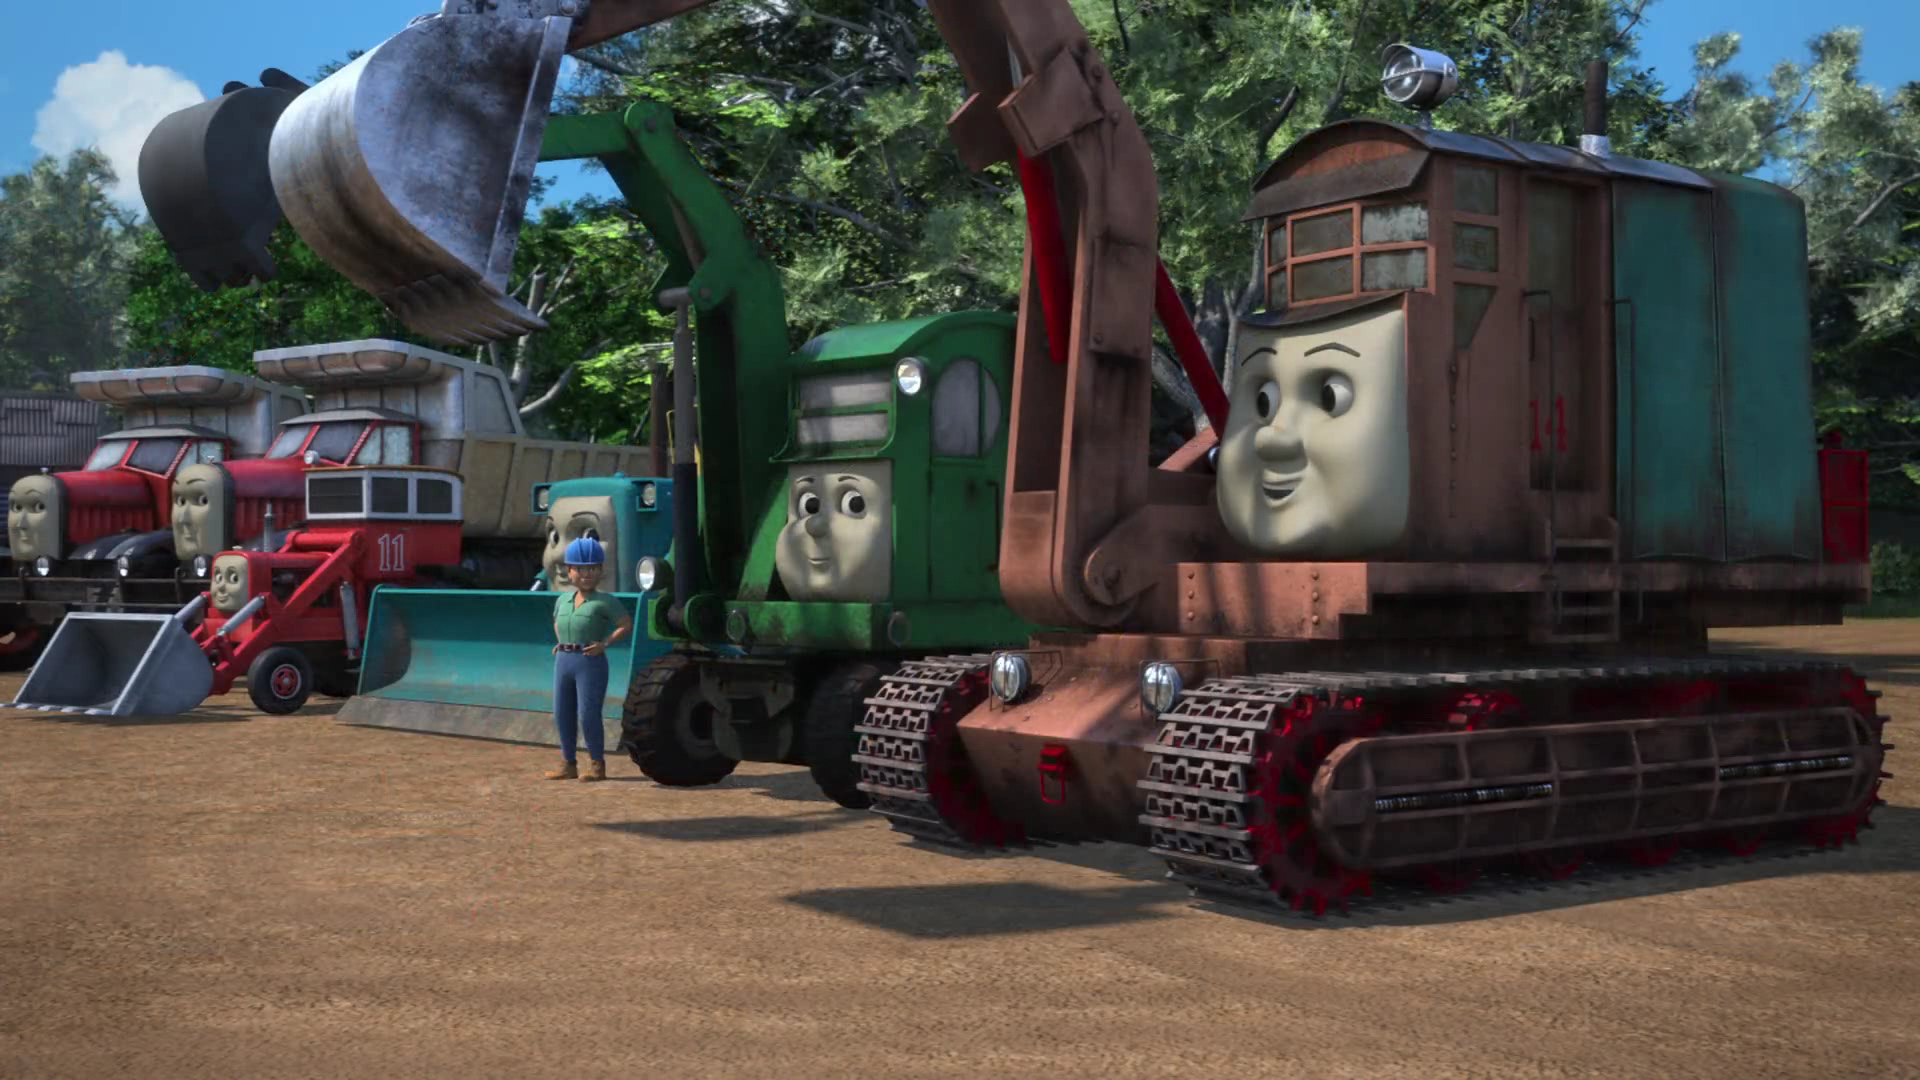 thomas and friends sodor